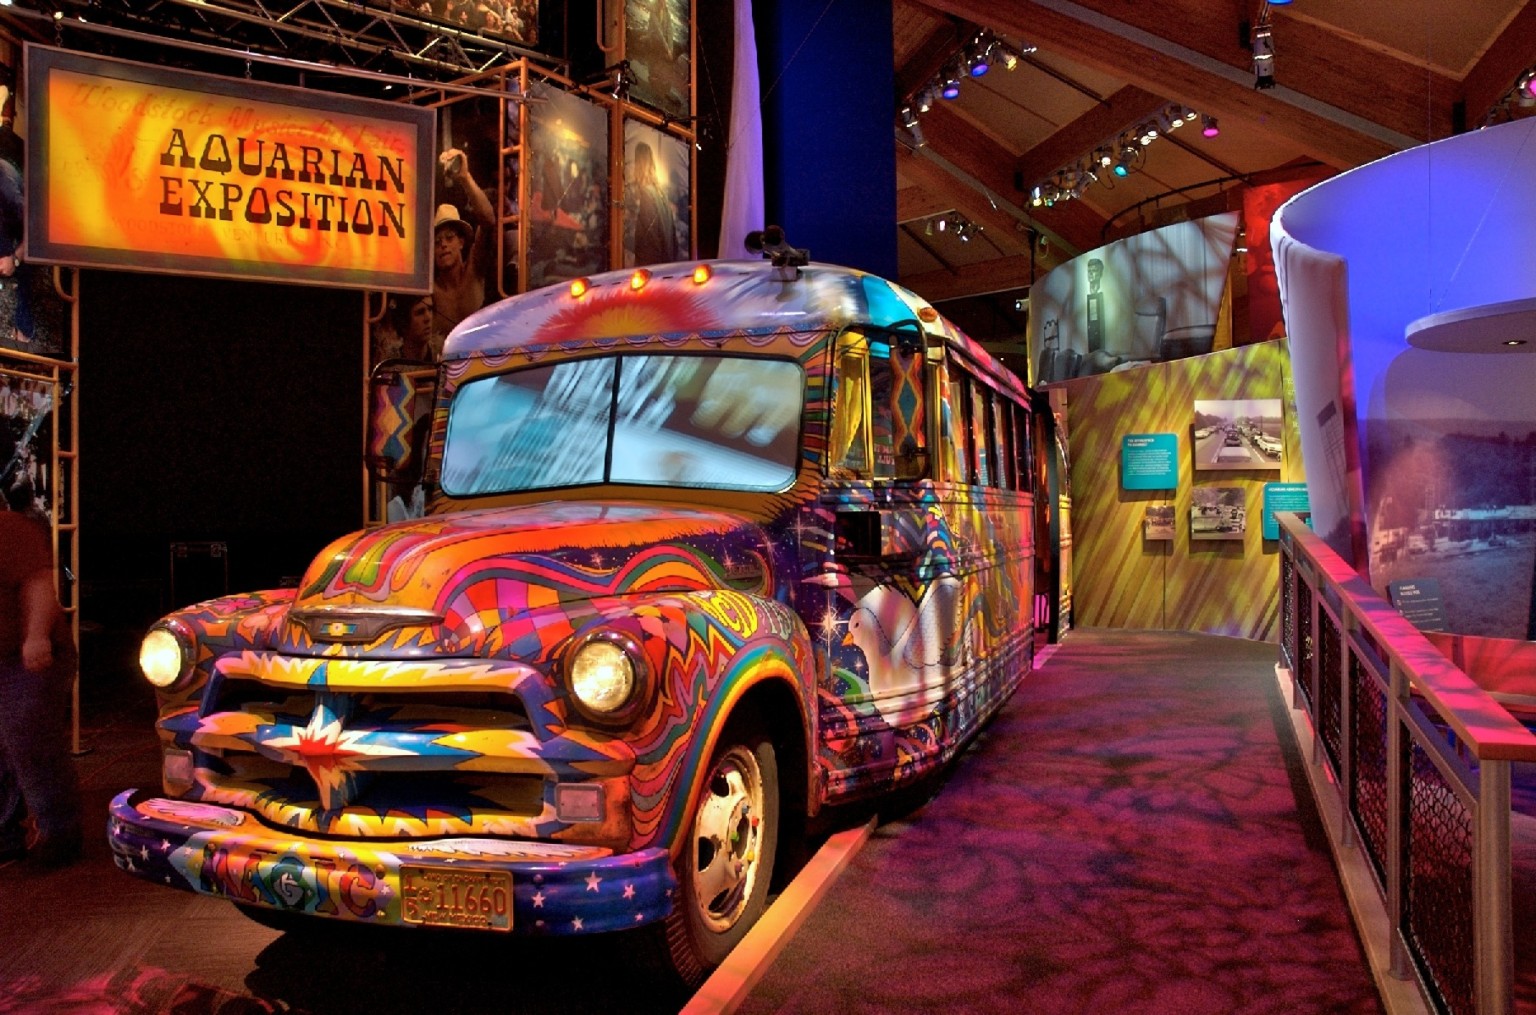 Bus with multicolored abstract painting inside a room with textural colored lighting below a sign reading Aquarian Exposition